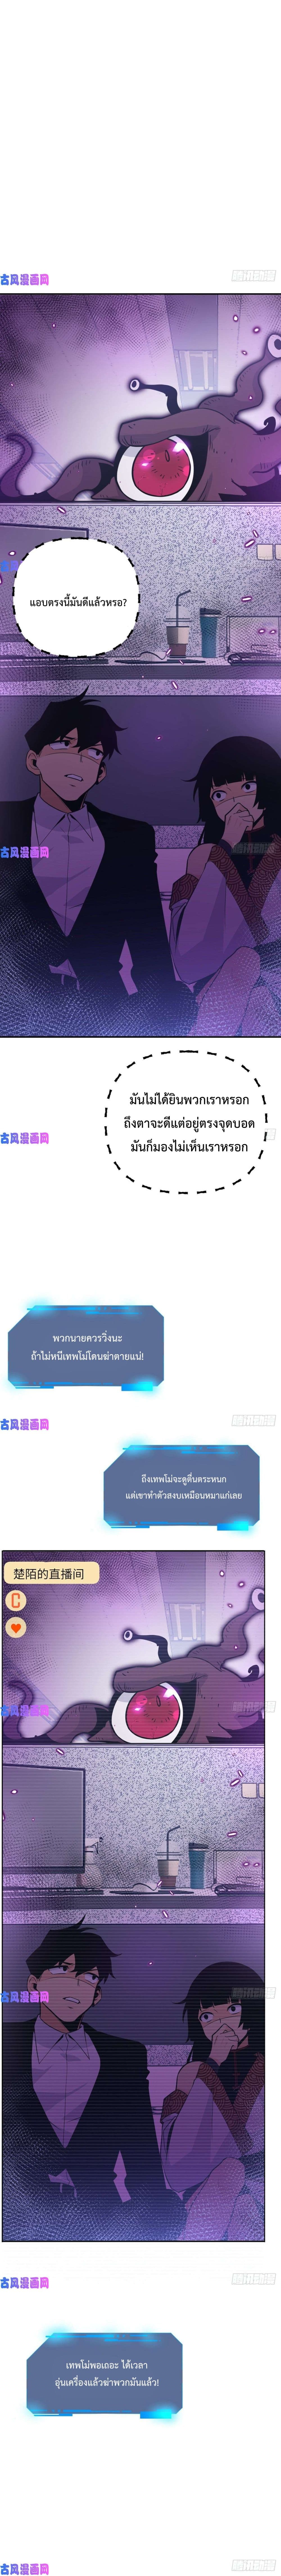 After Signing In For 30 Days, I Can Annihilate Stars เธ•เธญเธเธ—เธตเน 8 (11)